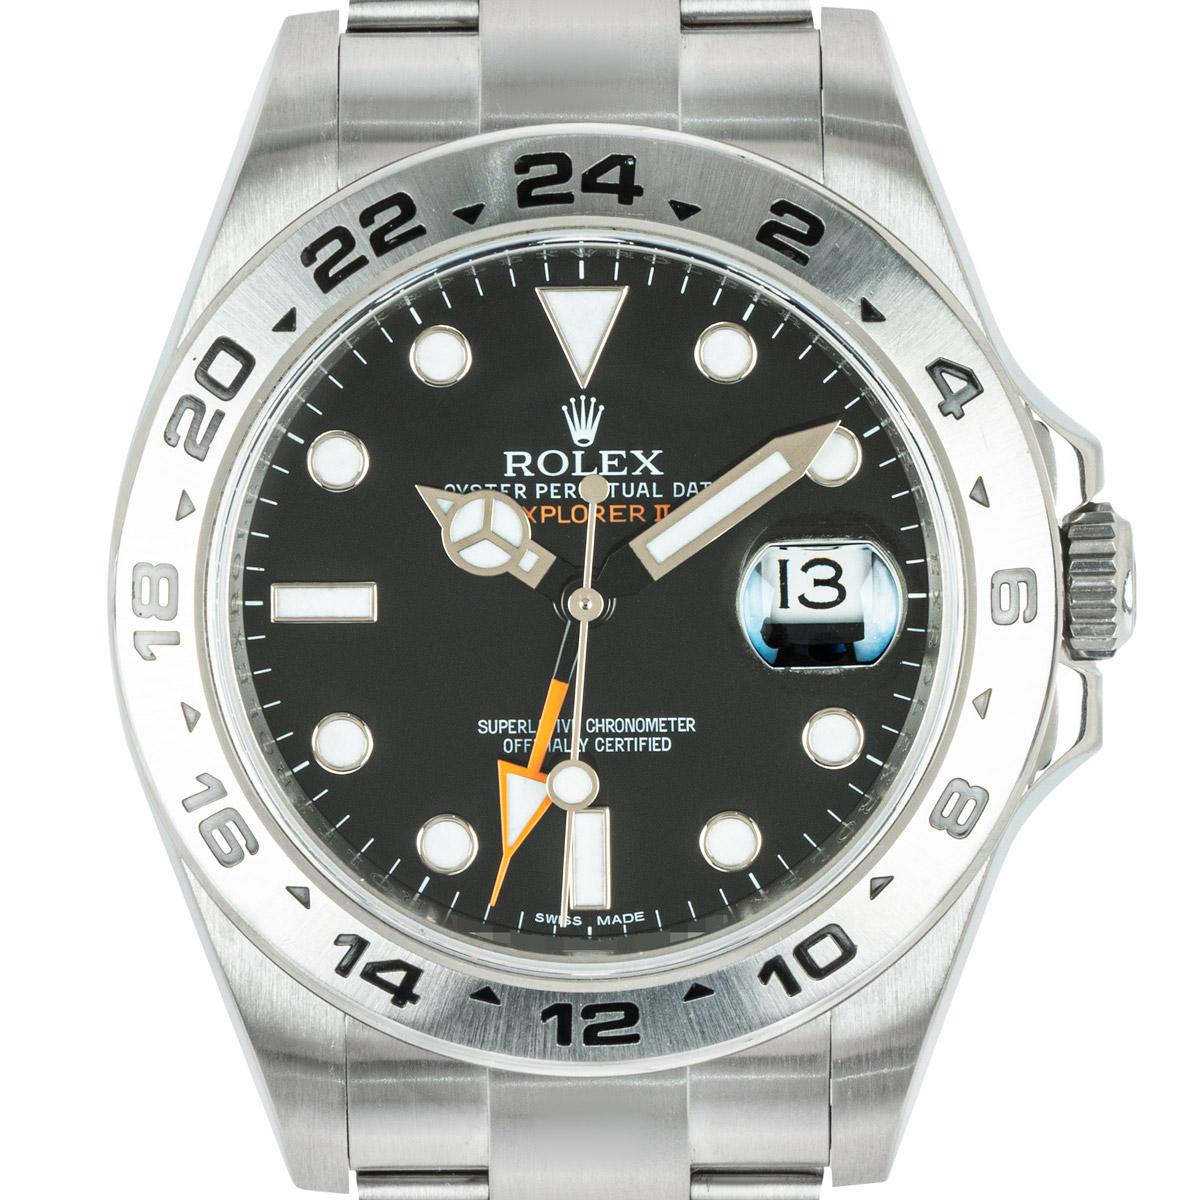 A men's Explorer II wristwatch in Oyster steel by Rolex. Featuring a black dial with applied hour markers, a date aperture, and an orange 24-hour hand. Complimenting the dial is a fixed stainless steel bezel with an engraved 24-hour display.

Fitted